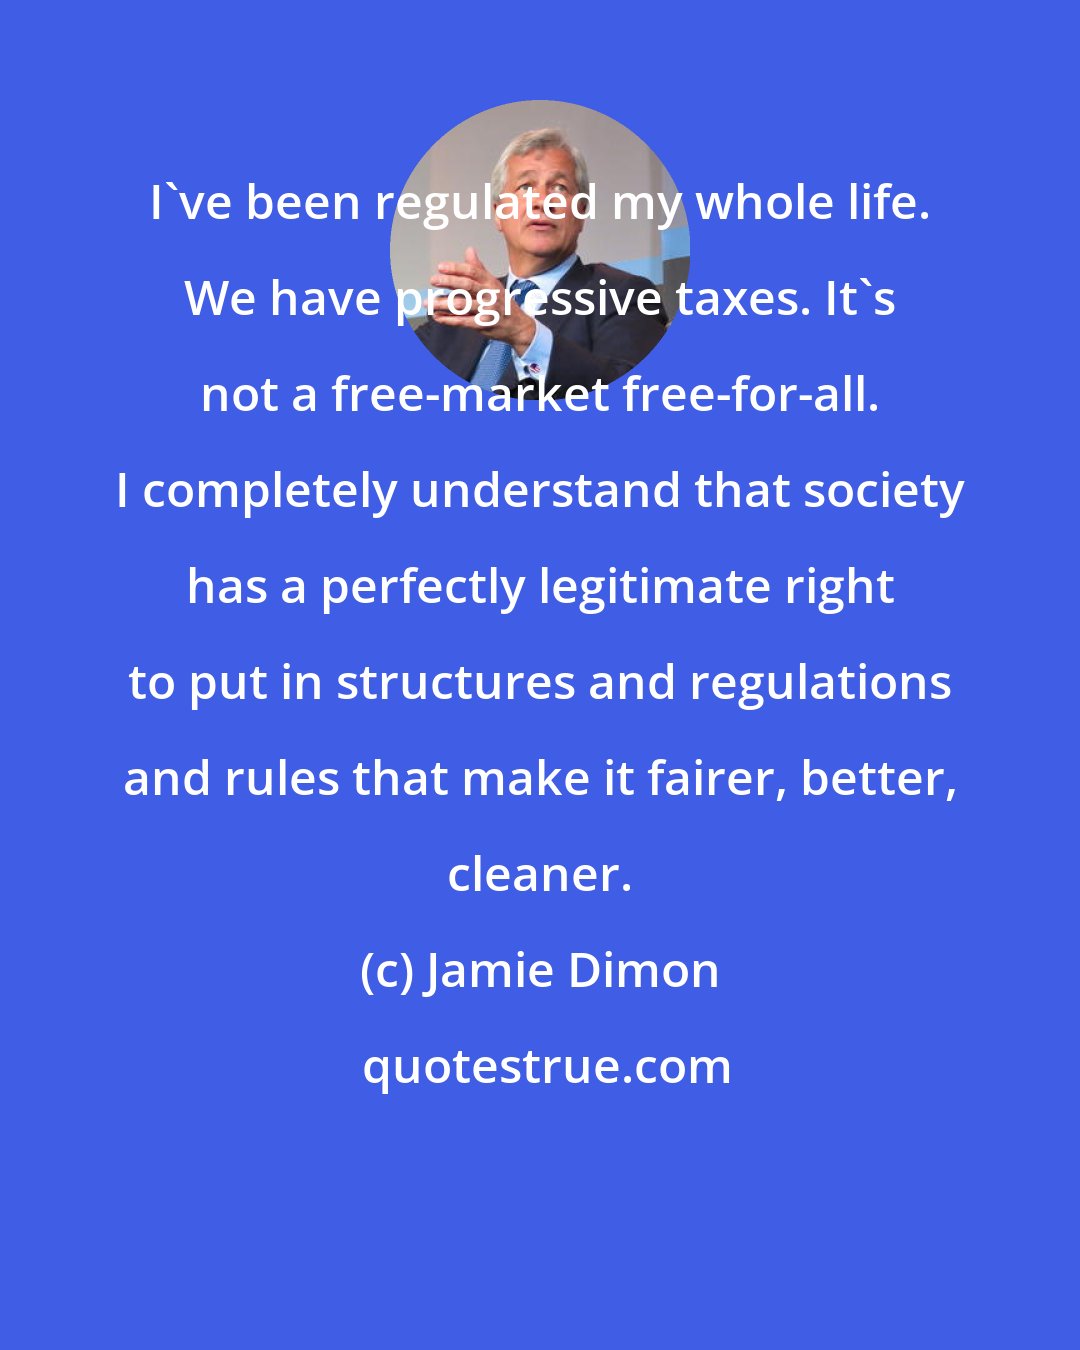 Jamie Dimon: I've been regulated my whole life. We have progressive taxes. It's not a free-market free-for-all. I completely understand that society has a perfectly legitimate right to put in structures and regulations and rules that make it fairer, better, cleaner.